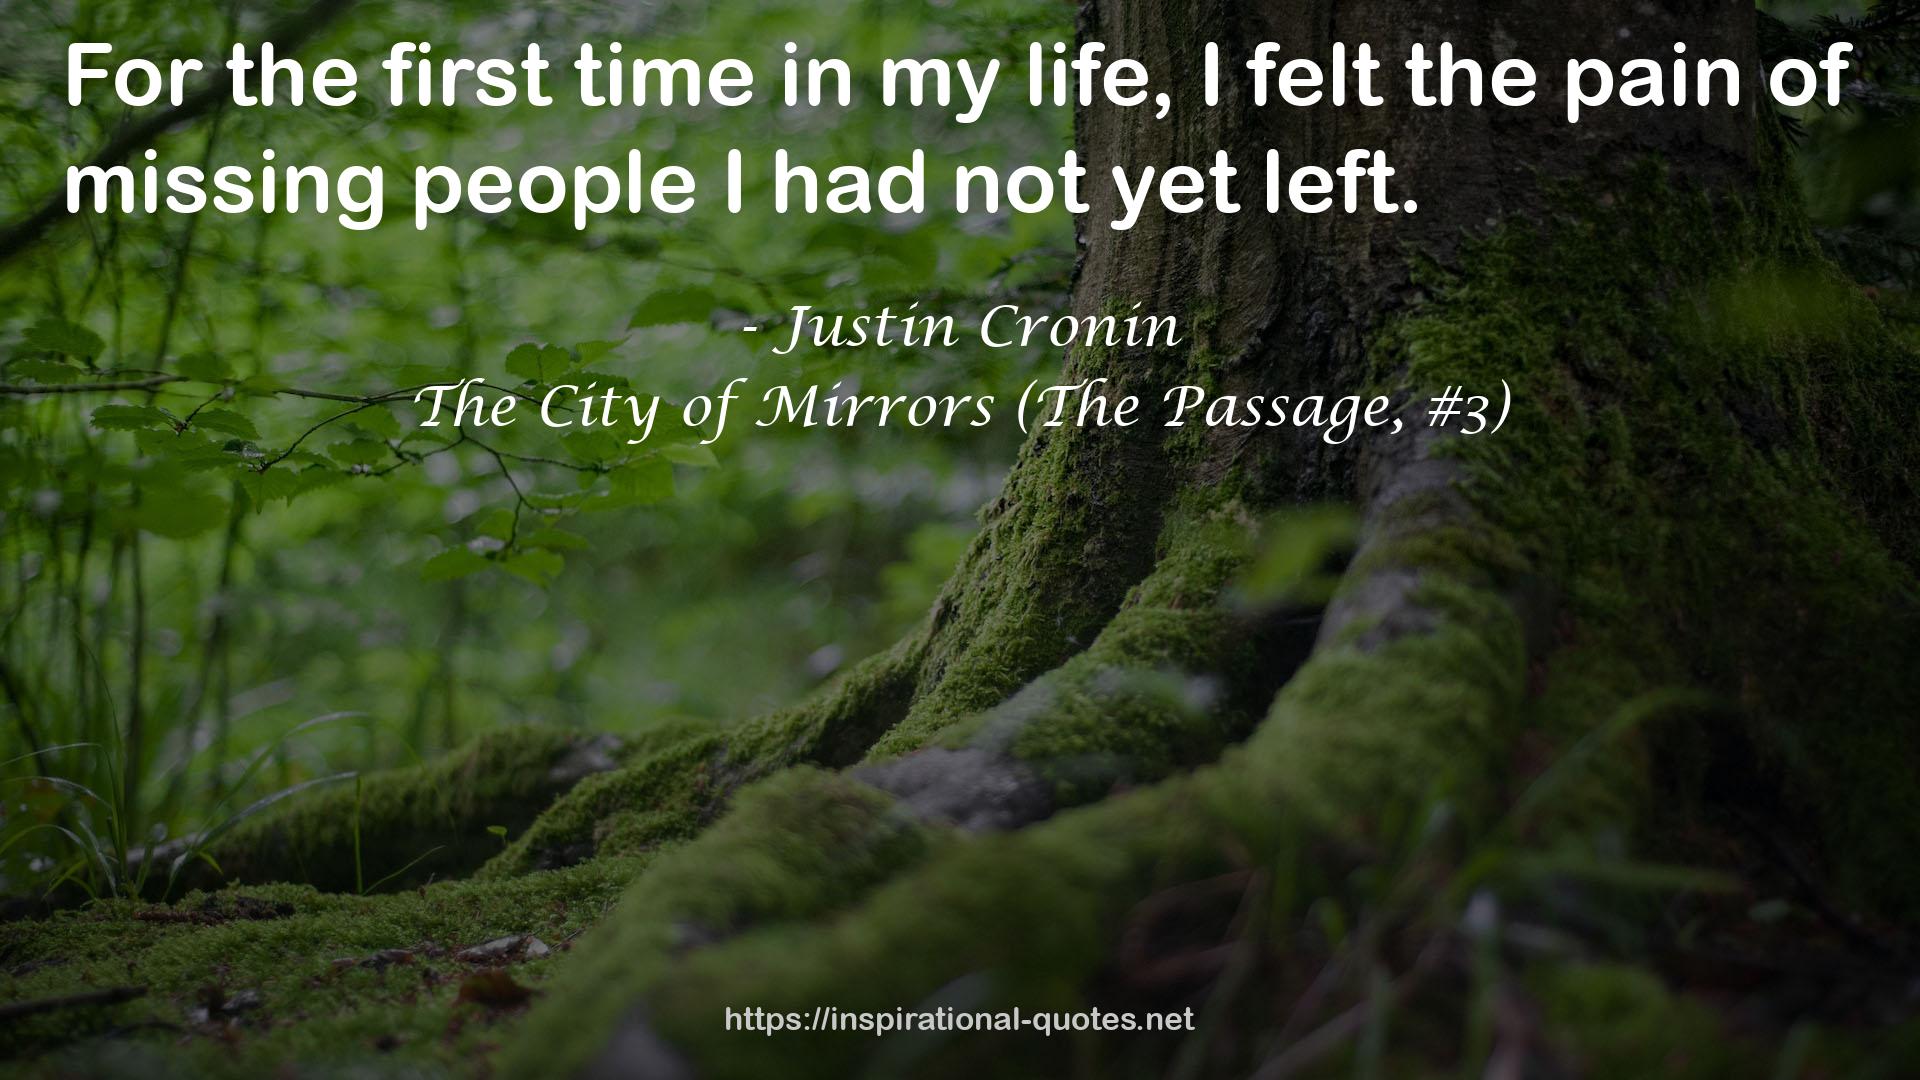 The City of Mirrors (The Passage, #3) QUOTES